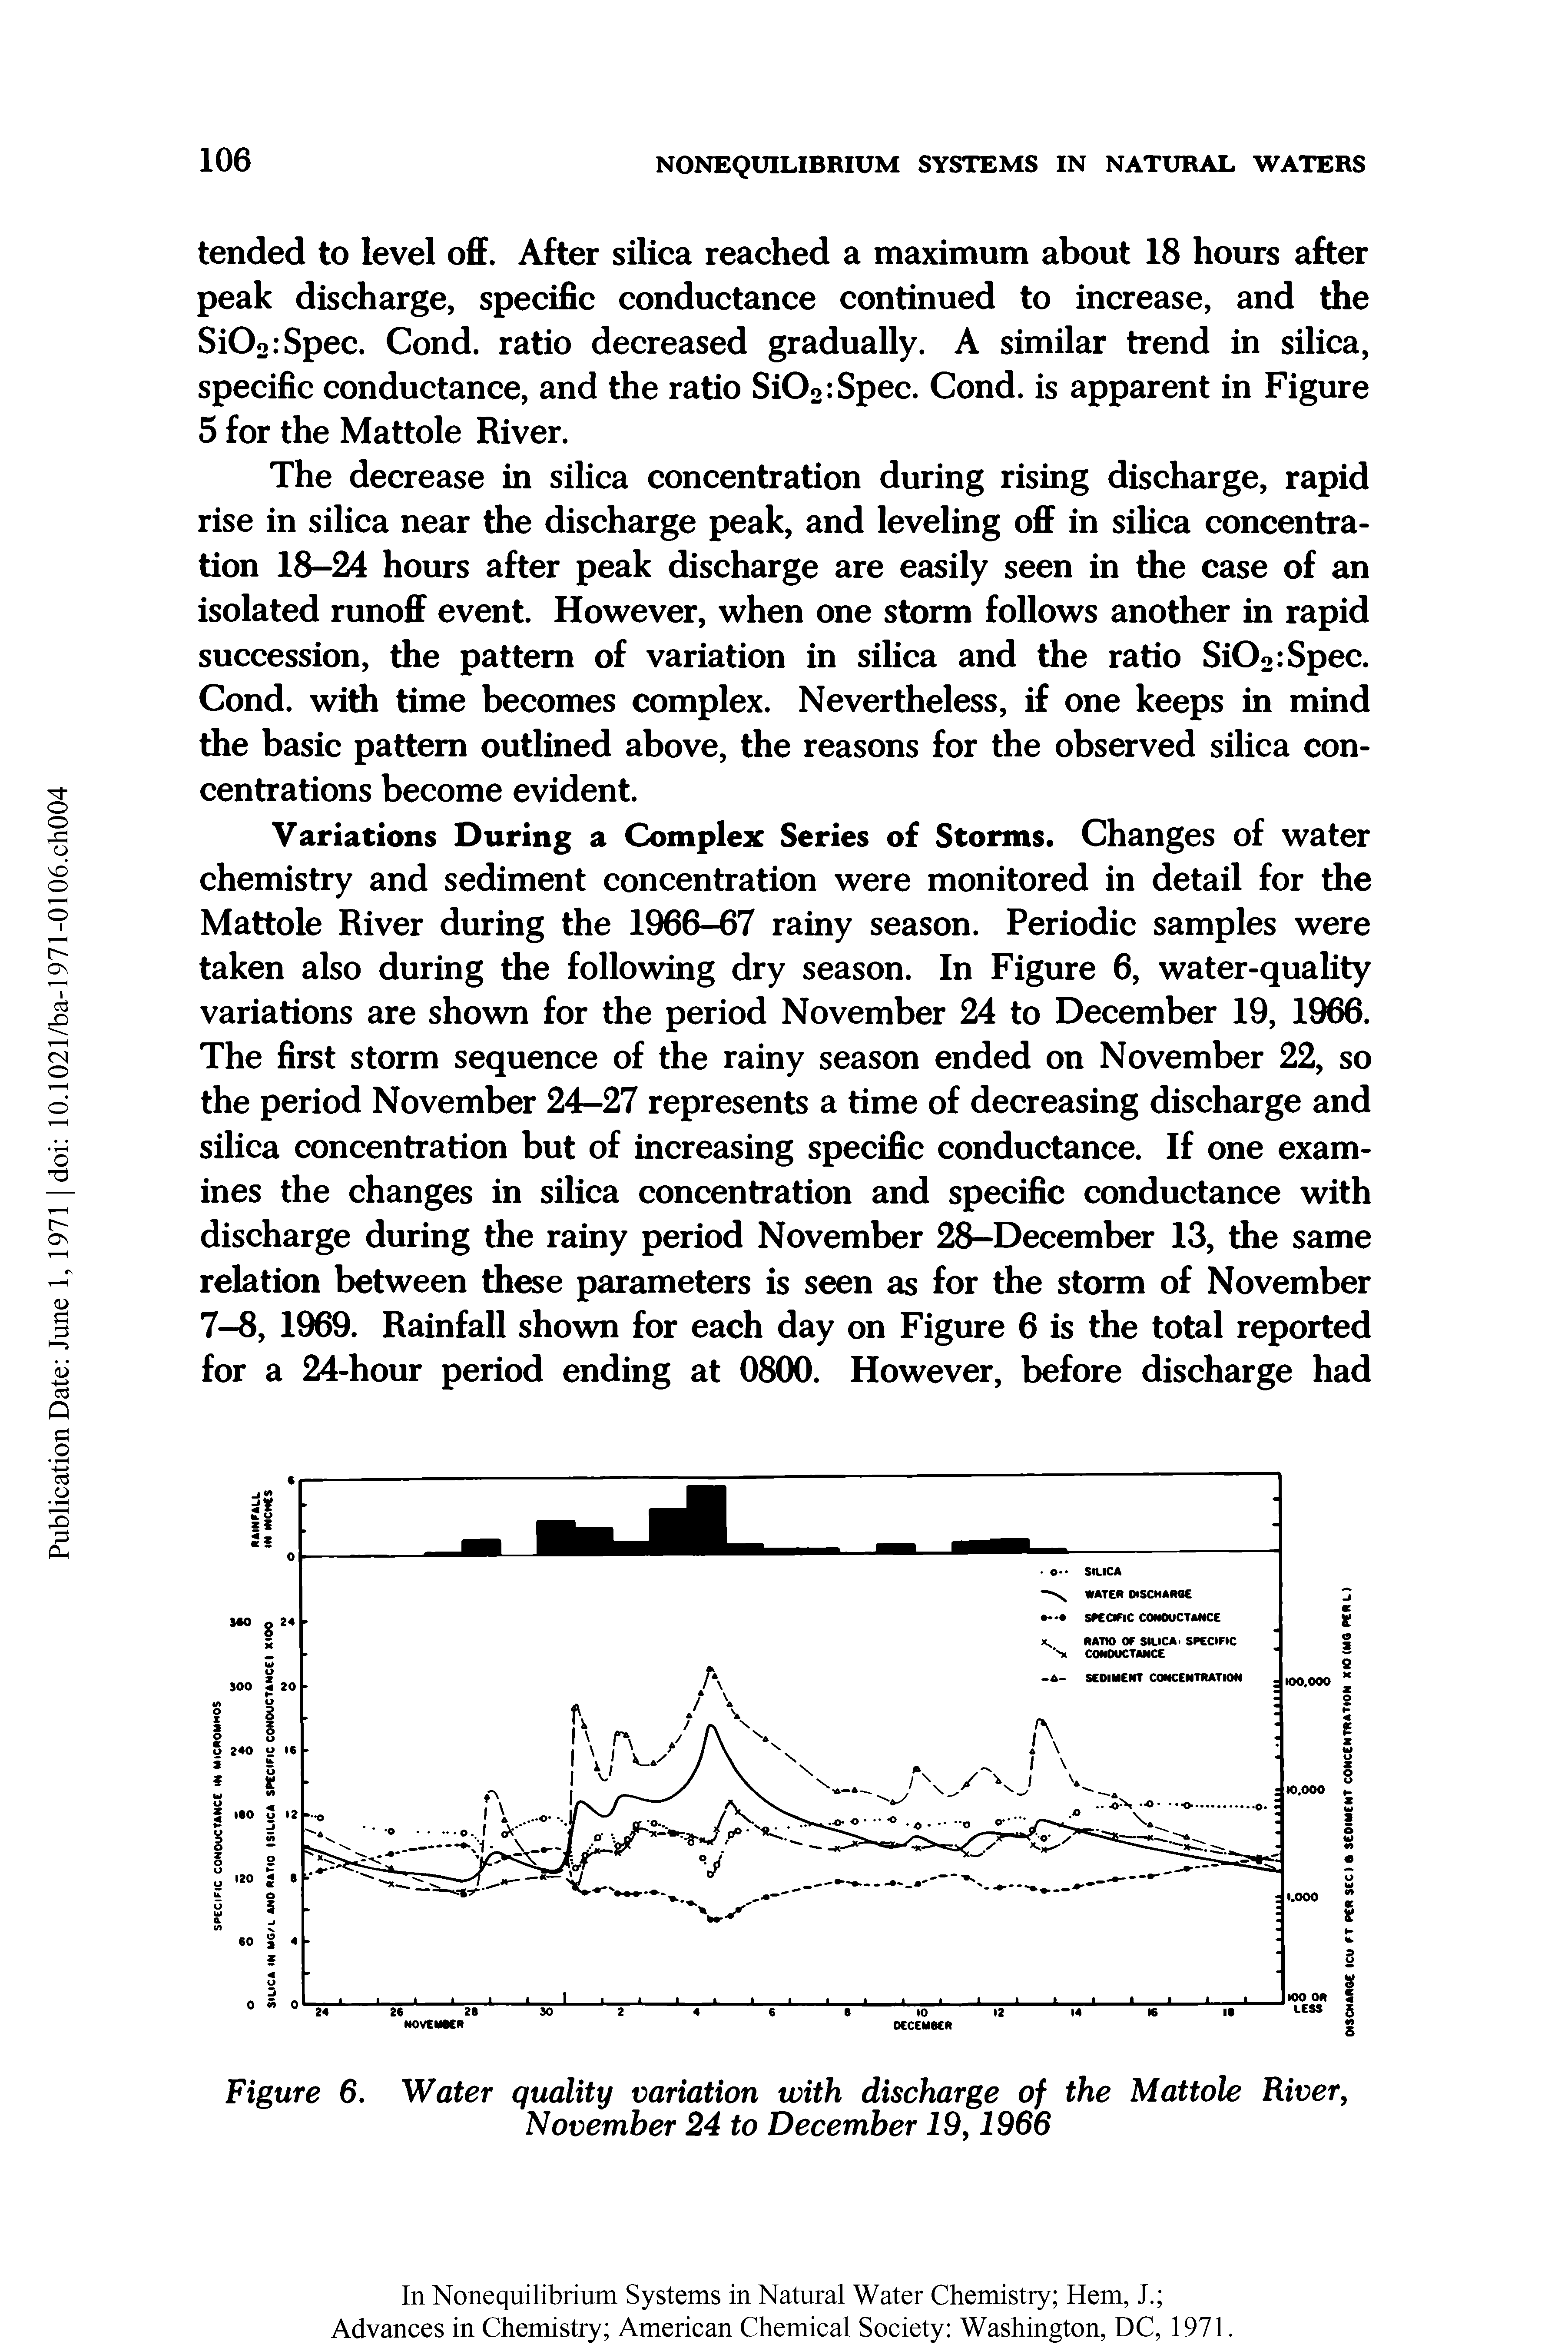 Figure 6. Water quality variation with discharge of the Mattole River, November 24 to December 19,1966...